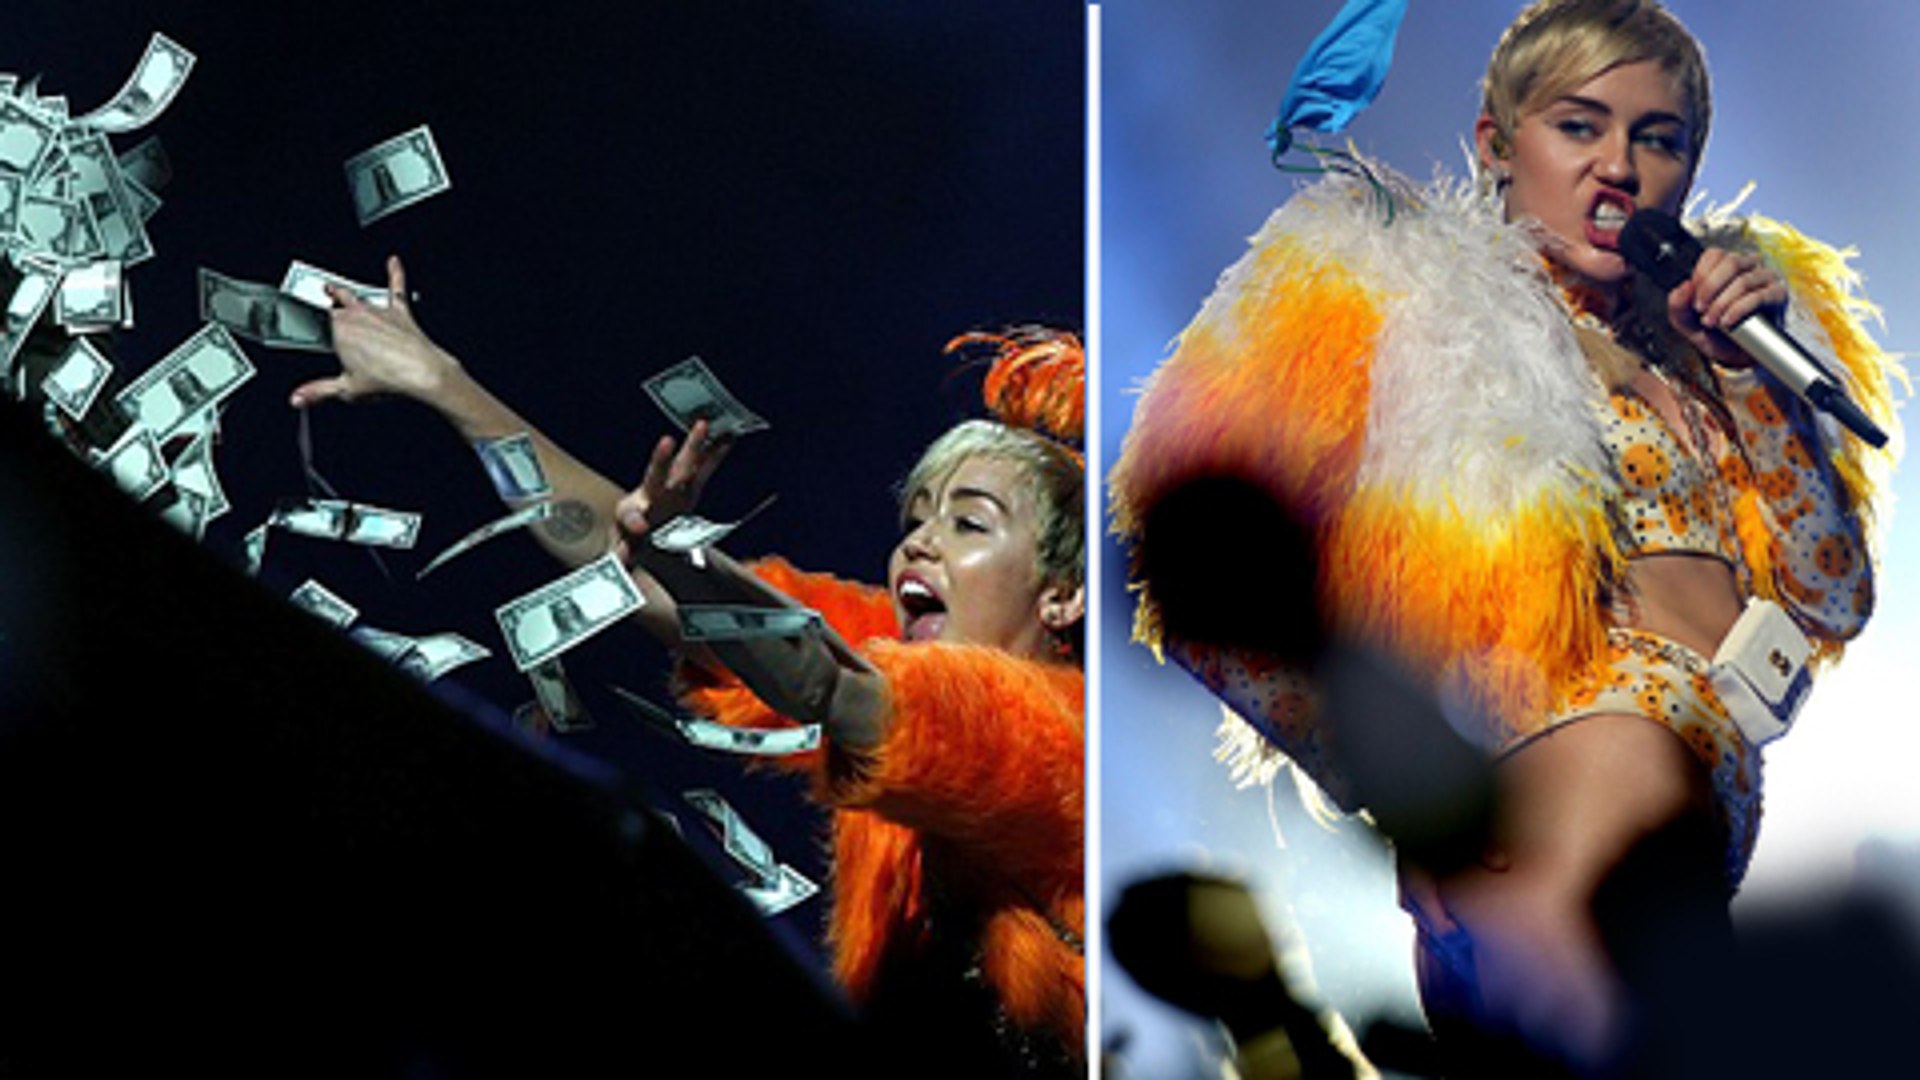 Miley Cyrus A$$-Grabbing, Fake Money, Feathers and more! | End of Bangerz Tour